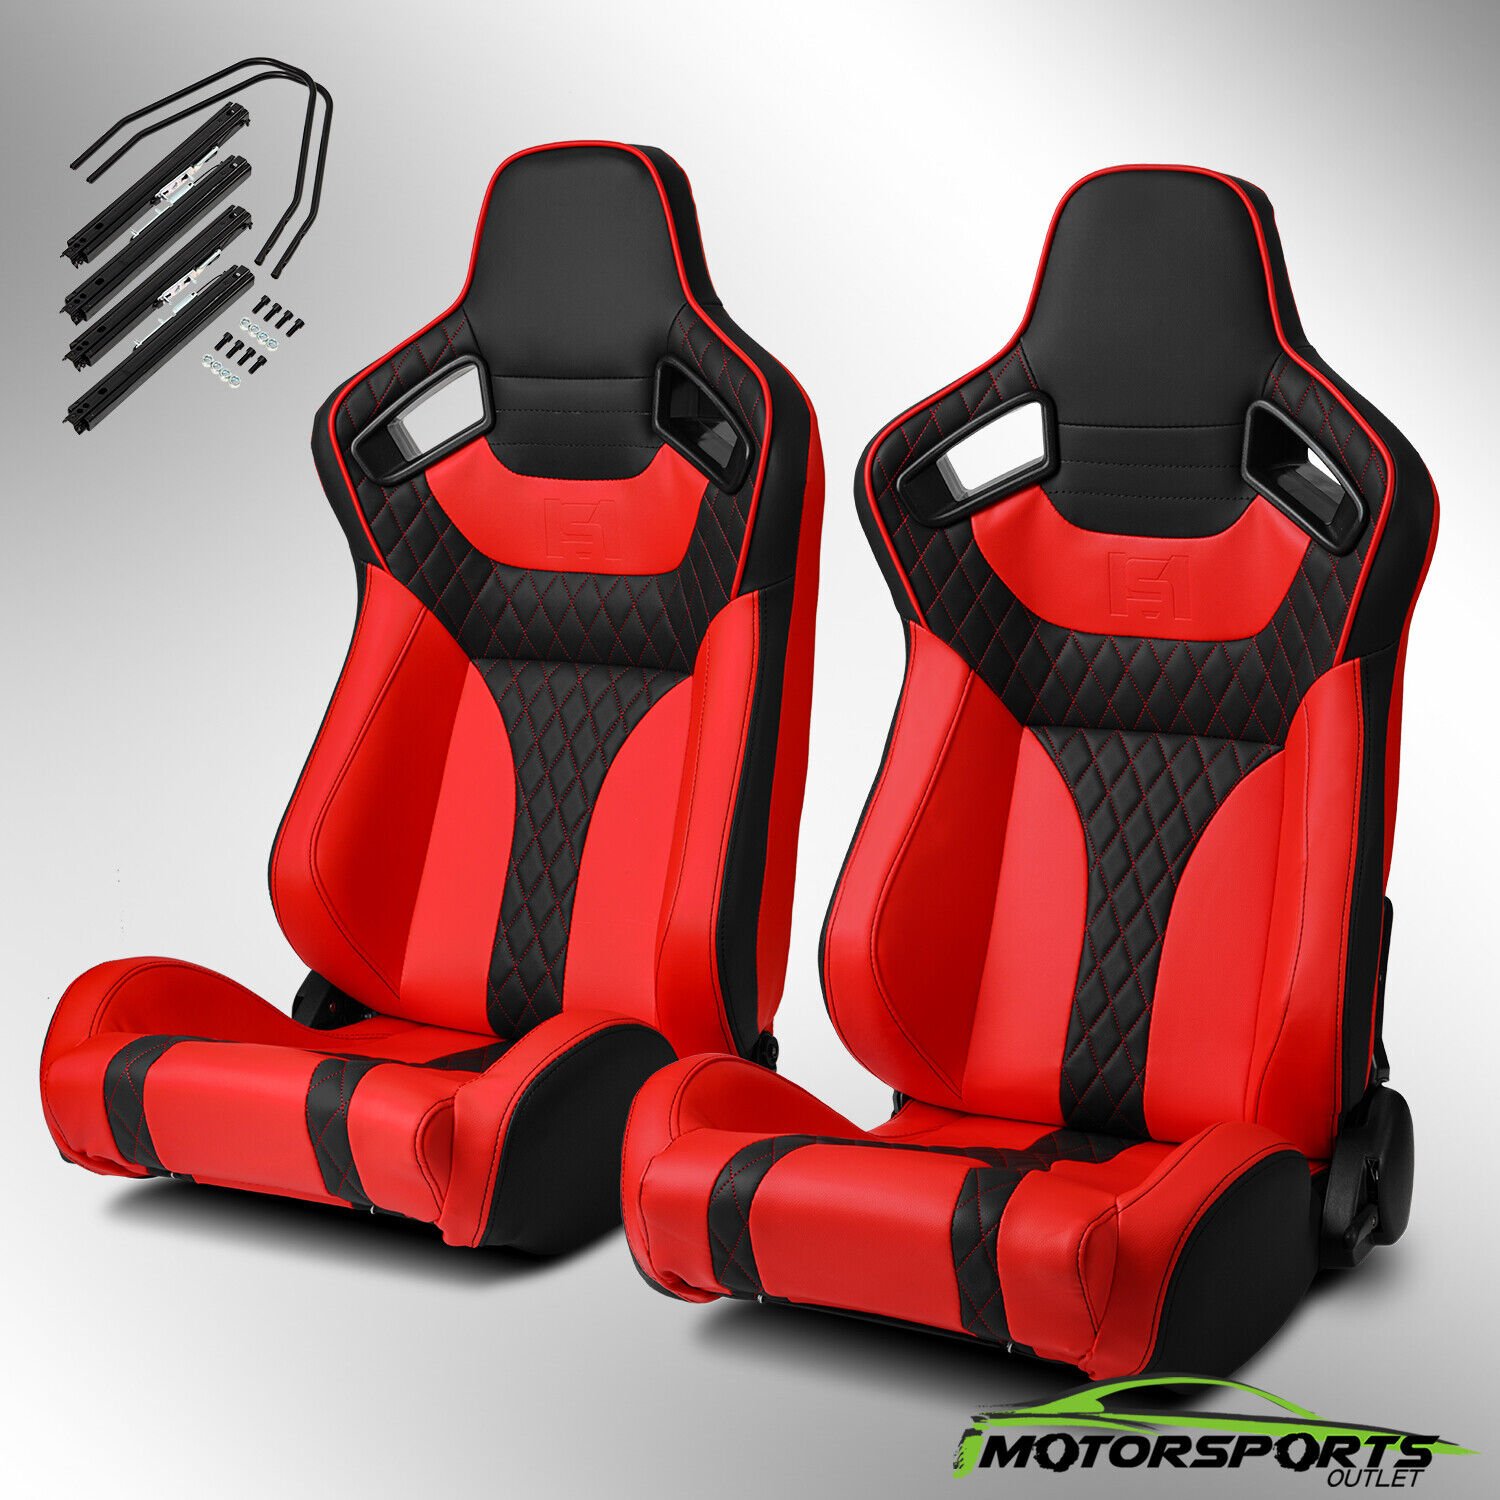 2x Universal Main Black + Red Side PVC Leather Reclinable Sport Racing Seats